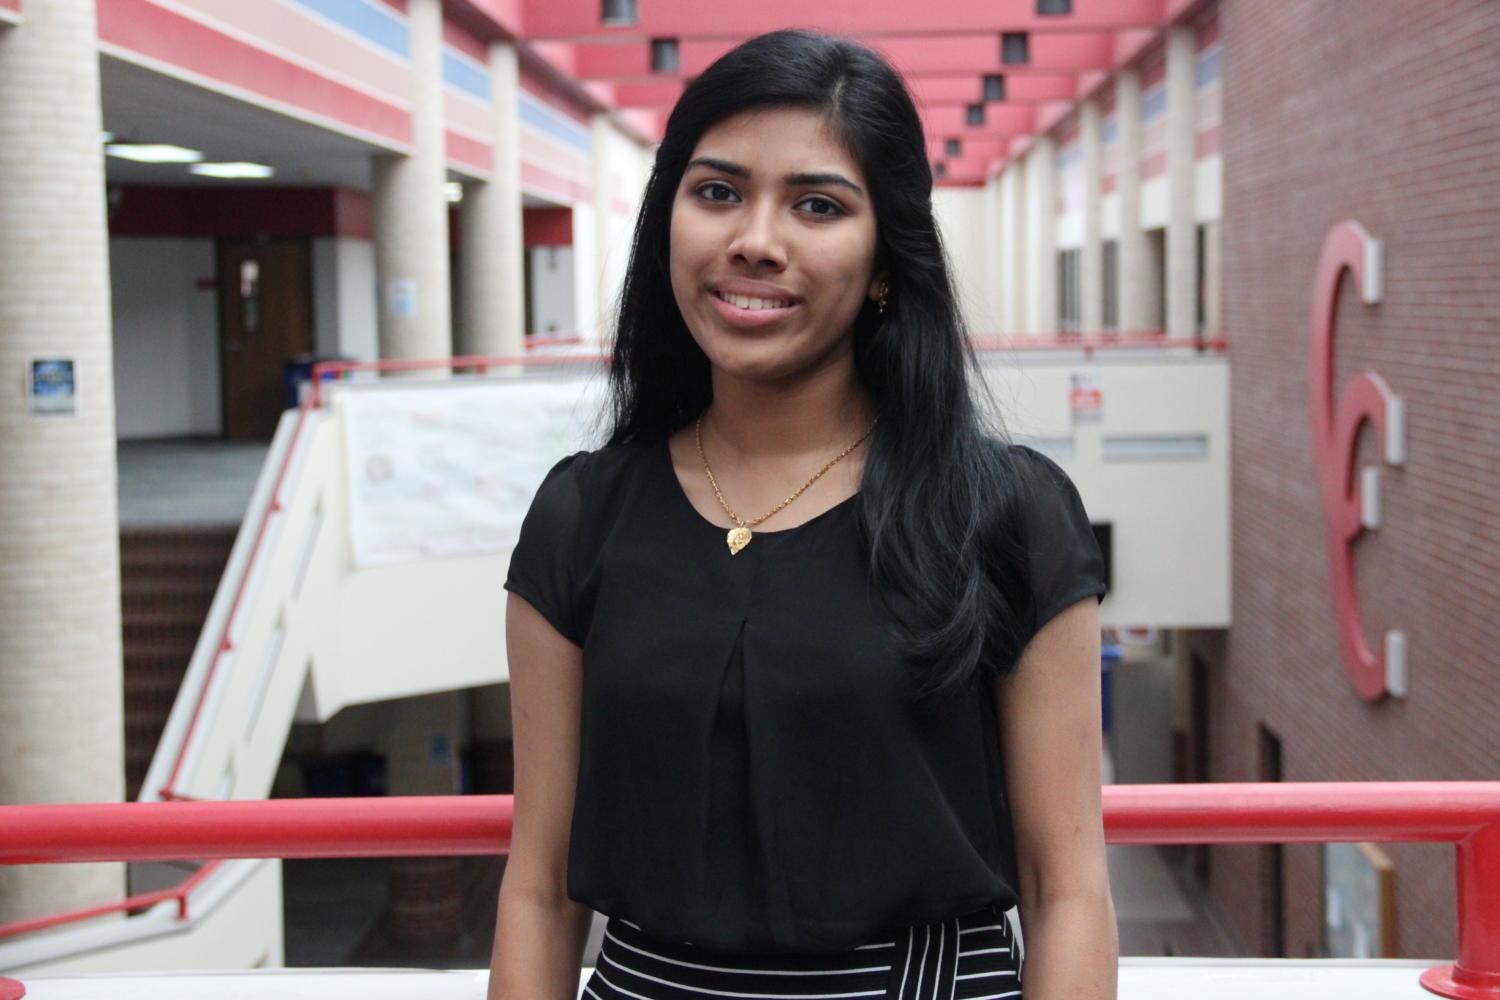 Coppell High School senior Nikitha Vicas was recognized earlier this year as a scholar in the prestigious McDermott Program at the University of Texas at Dallas, where she plans on attending next year. She is also ranked third in her class and is a semifinalist for the U.S. Presidential Scholars program. 
